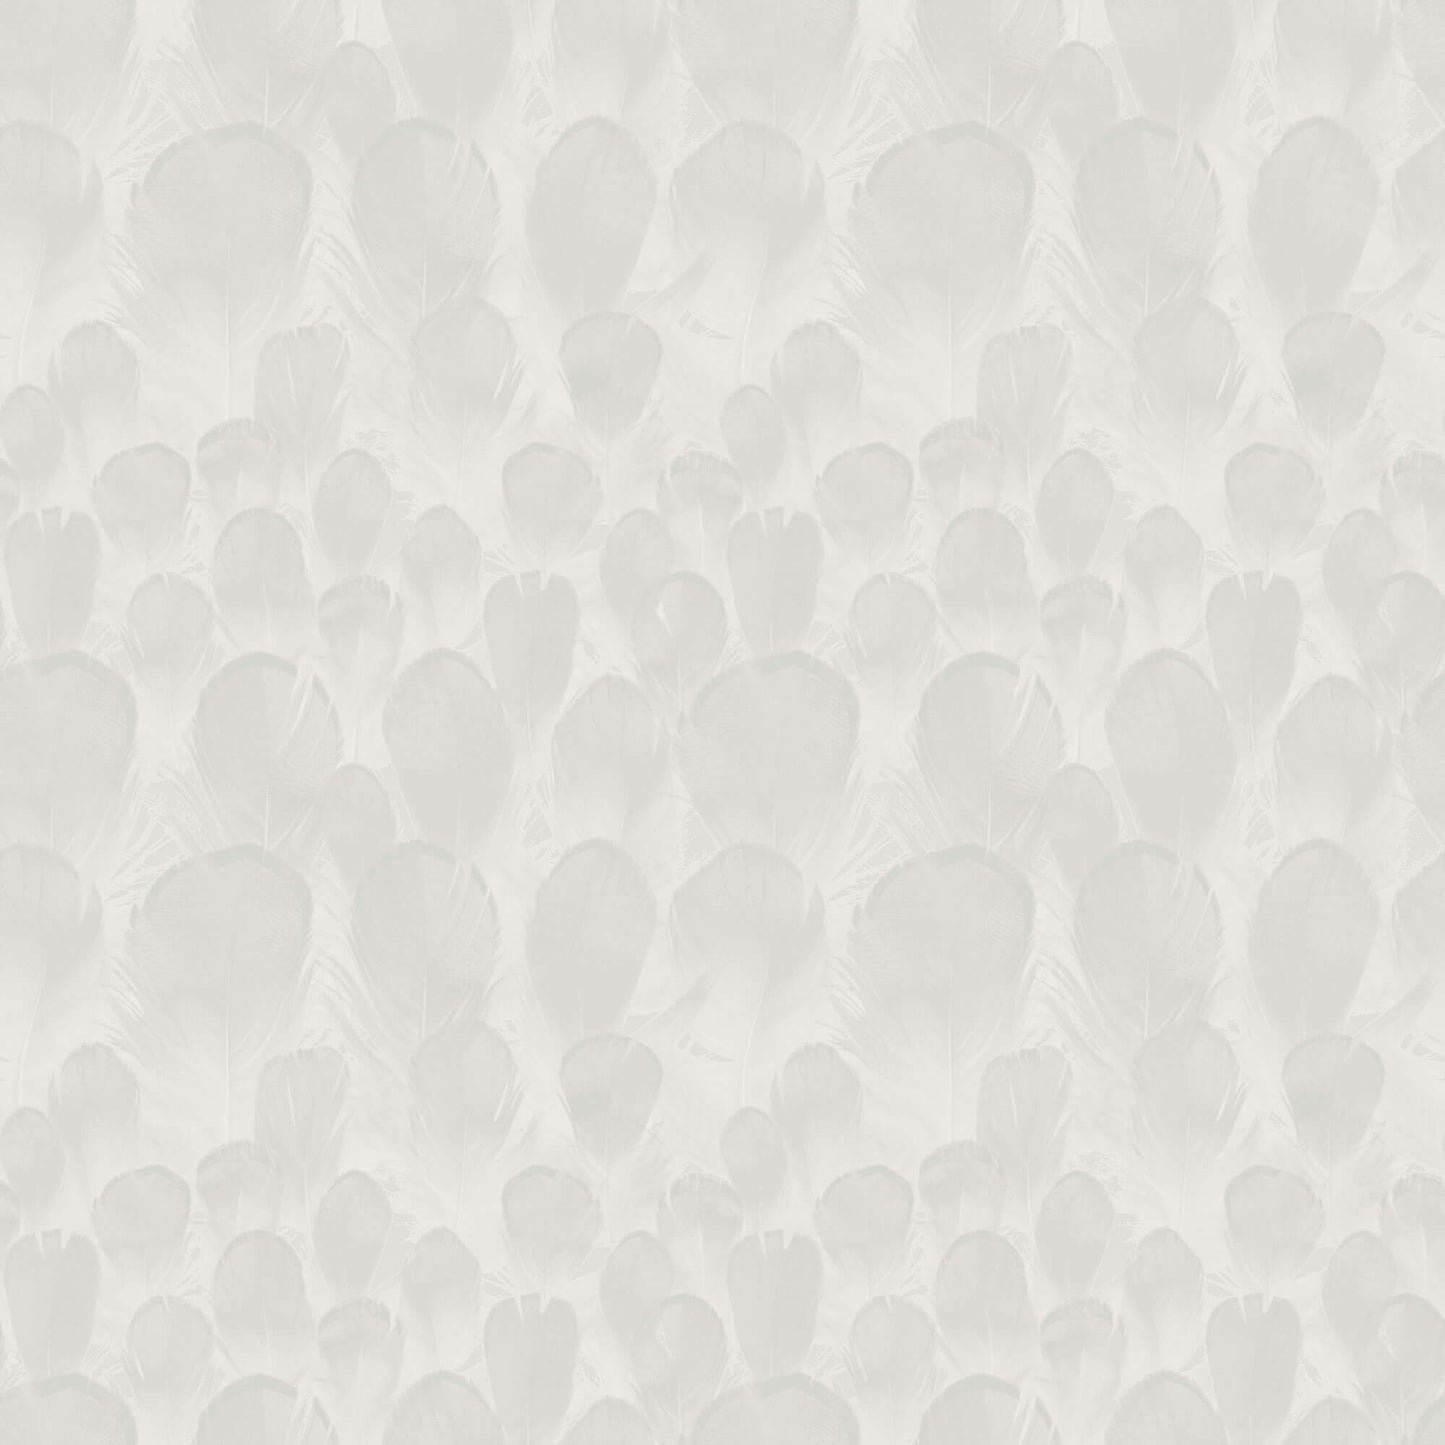 Feathers Wallpaper - SAMPLE SWATCH ONLY